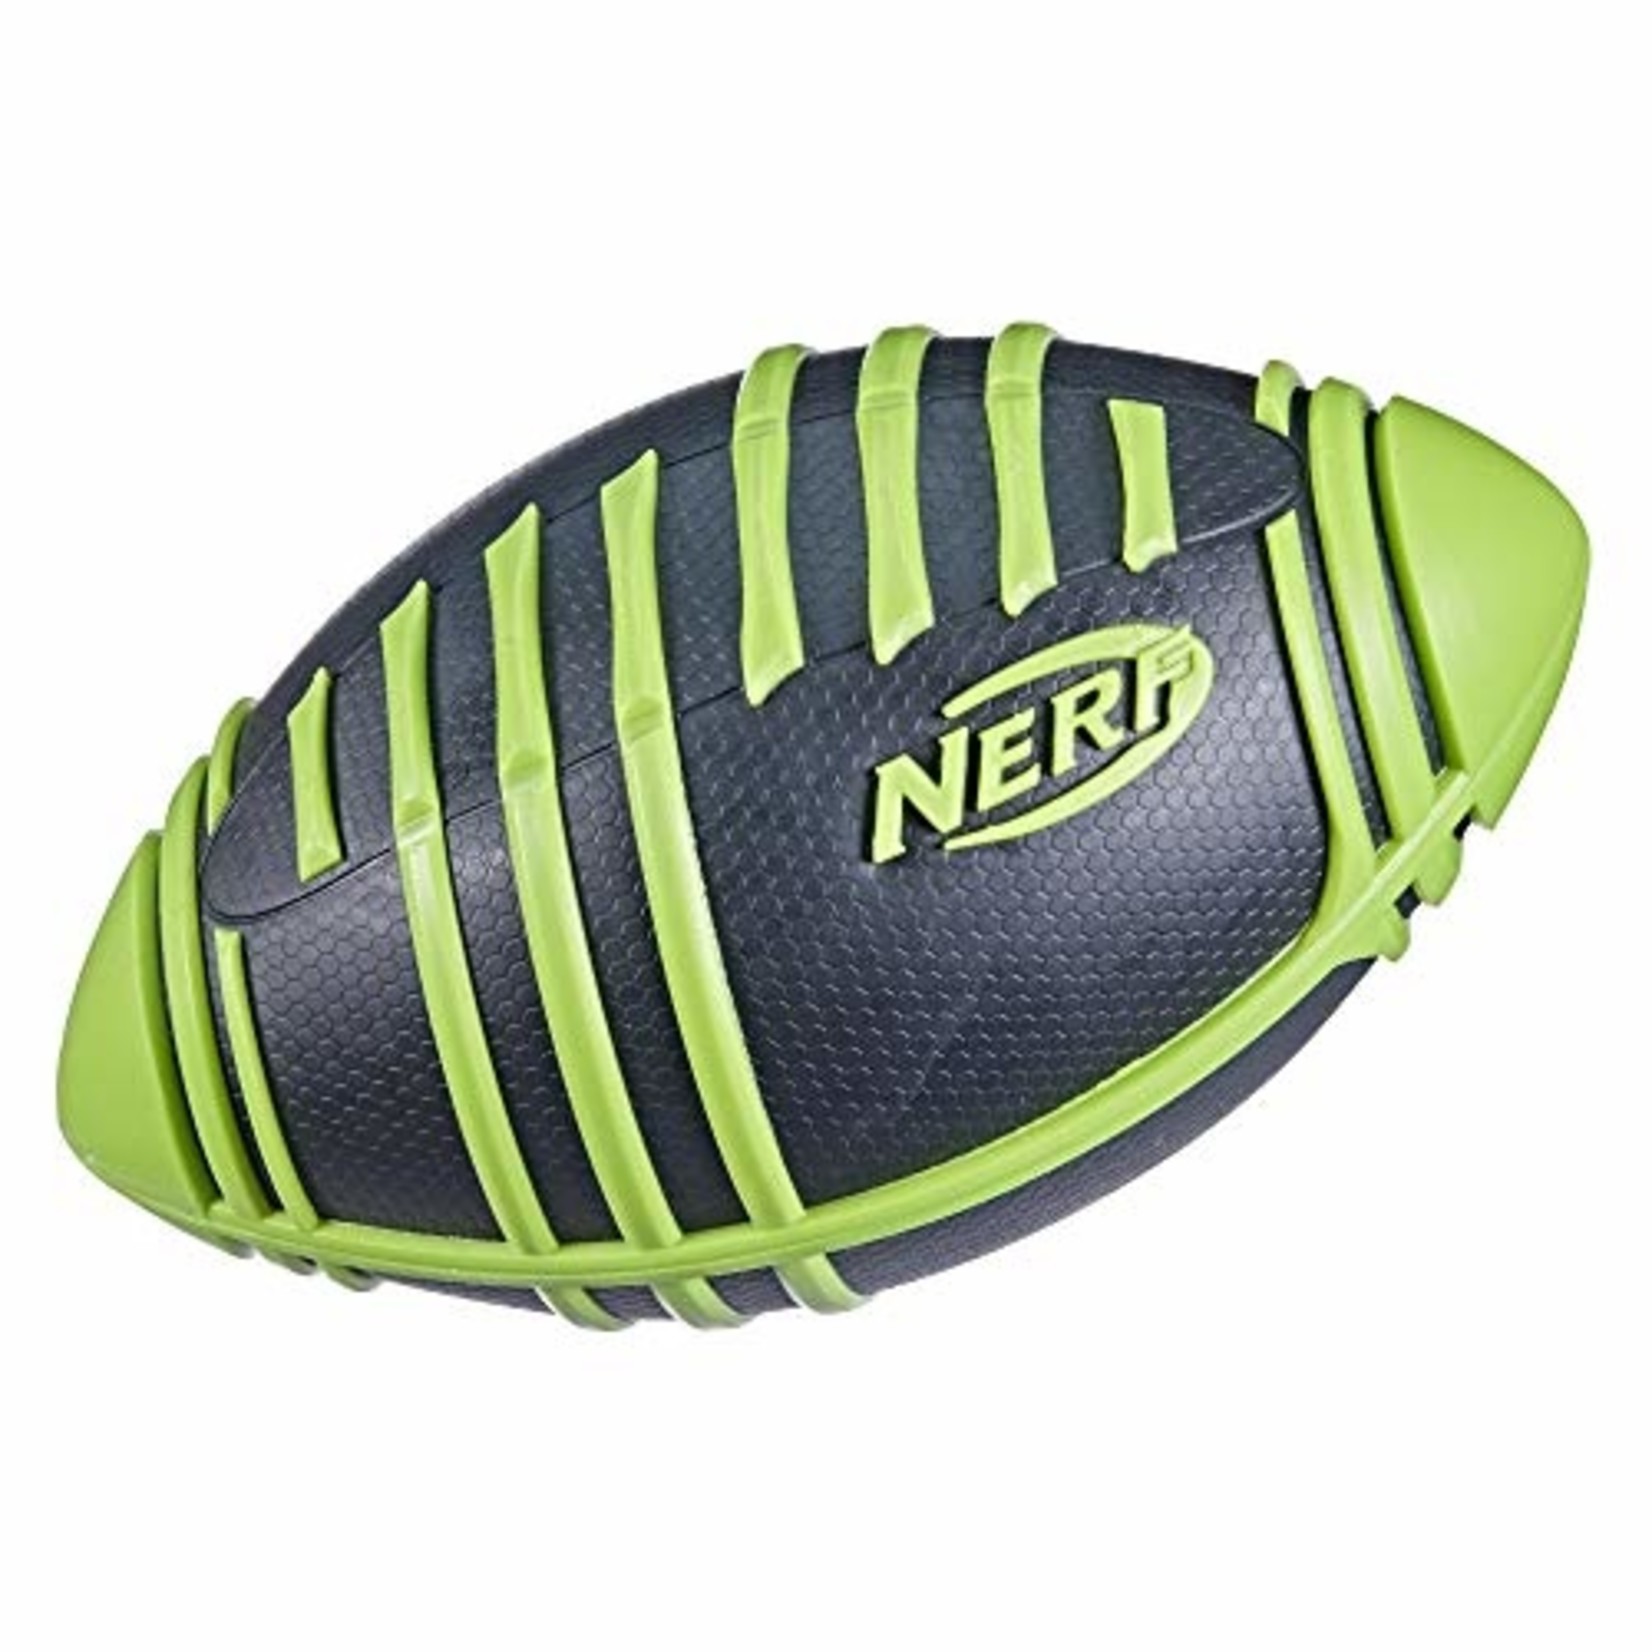 NERF Weather Blitz Foam Football for All-Weather Play  - Green